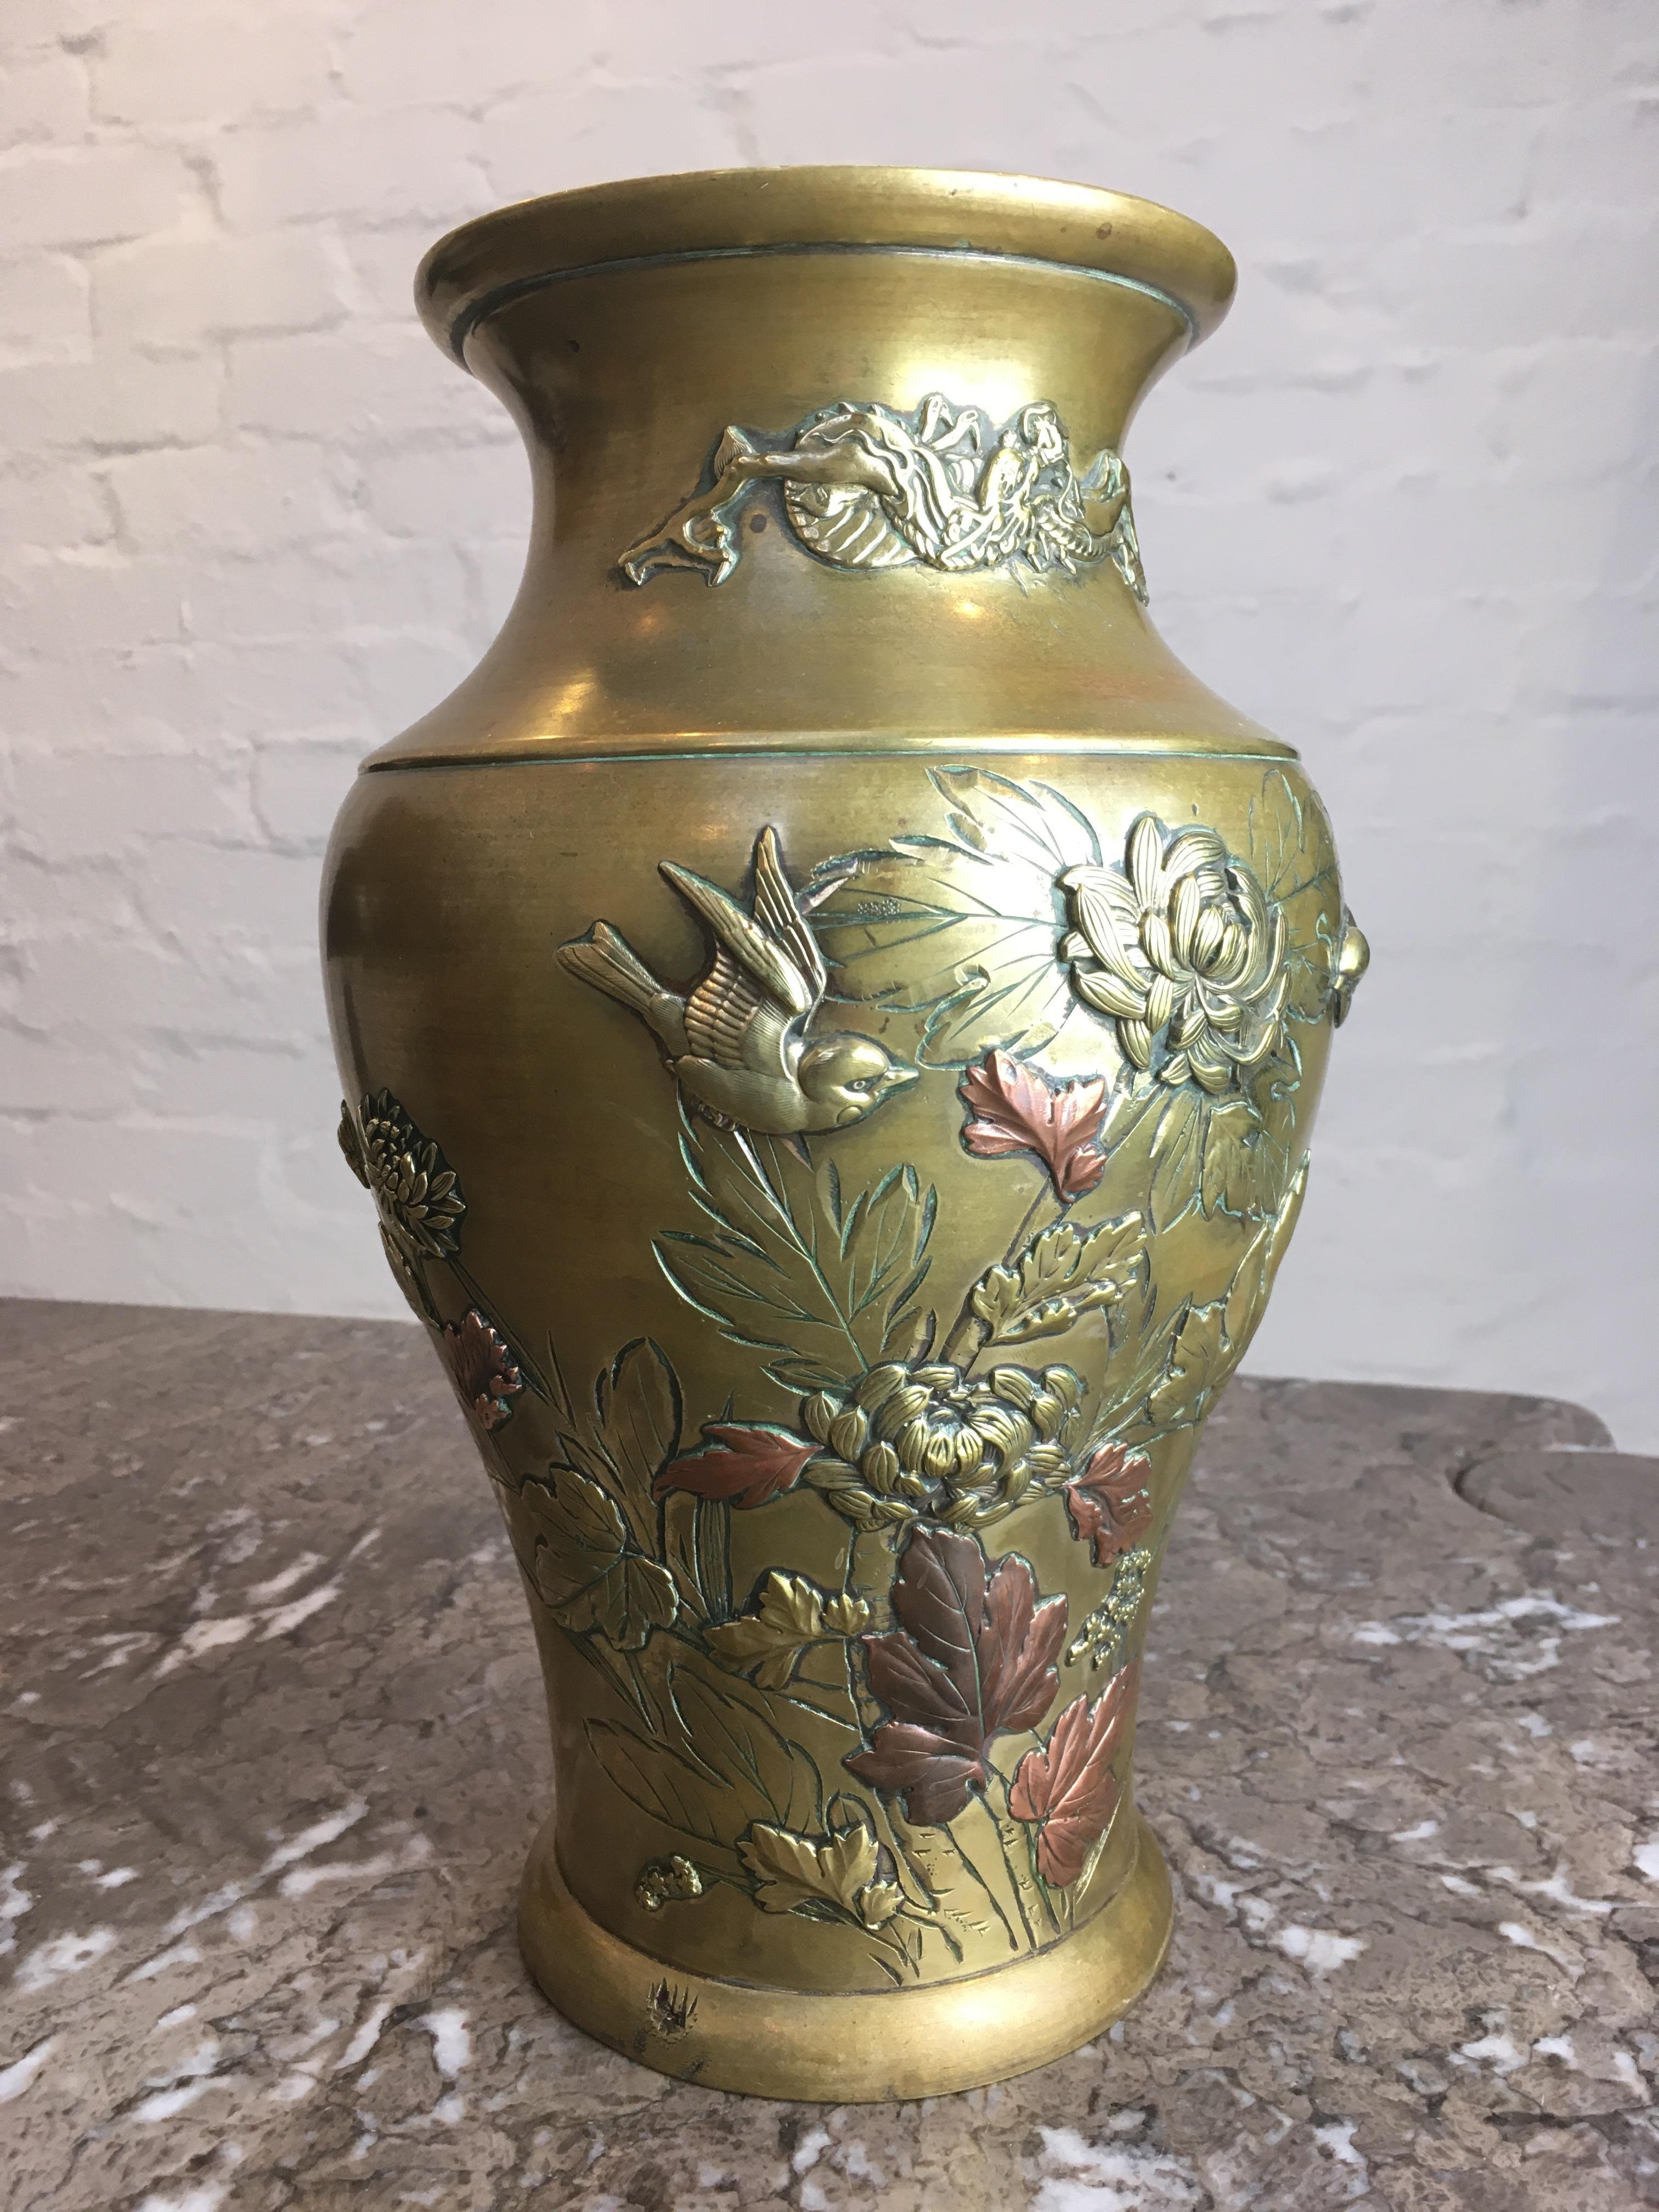 A delightful Japanese mixed metal vase for everyday use. The beautiful patina which develops with age in Meiji mixed metal has, sadly, been removed by a previous owner’s overzealous polishing. However, this allows us to present a vase for everyday